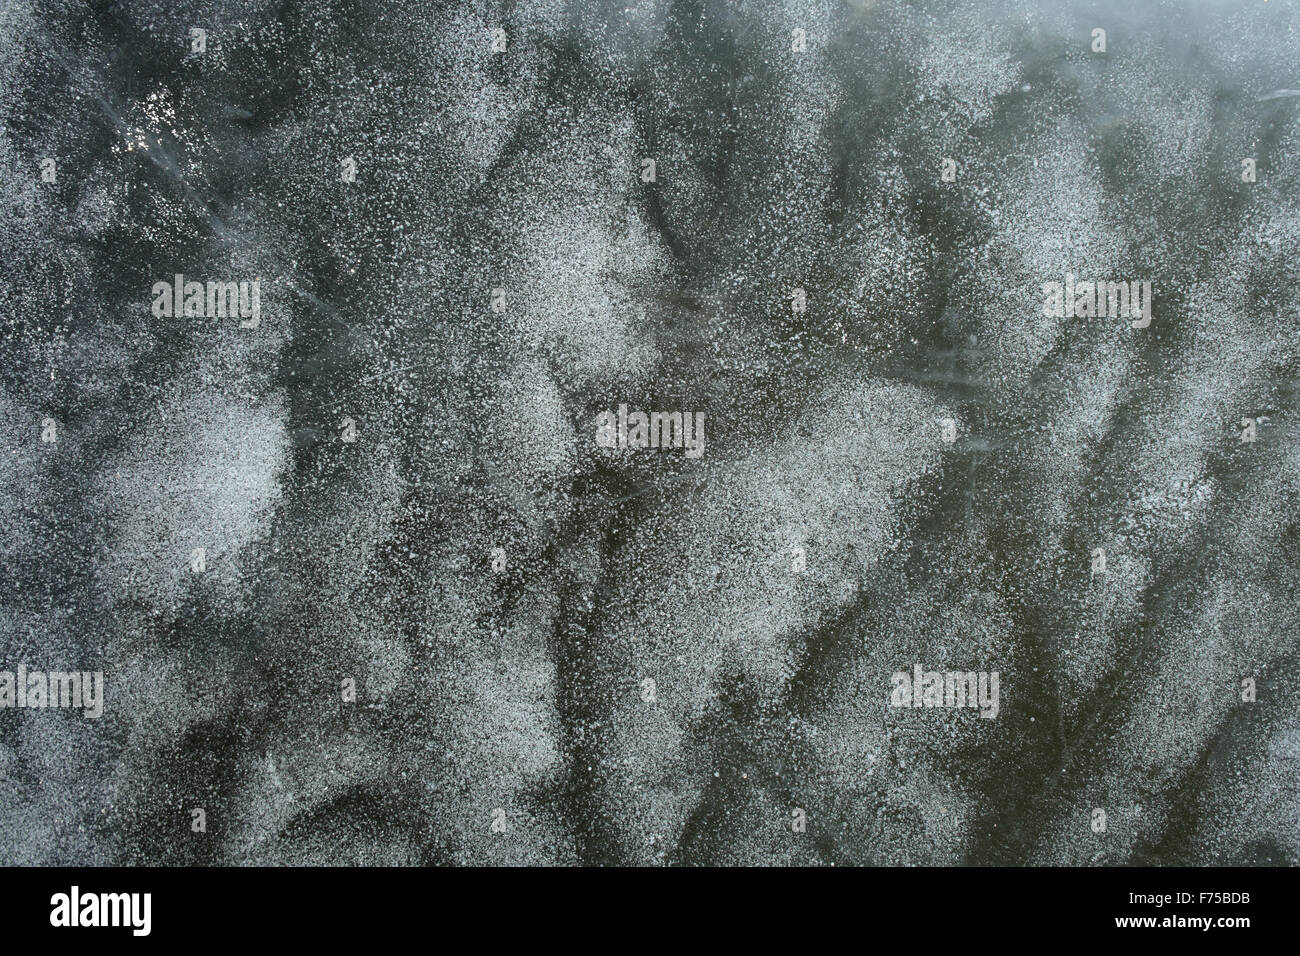 Frozen air bubbles in ice Stock Photo